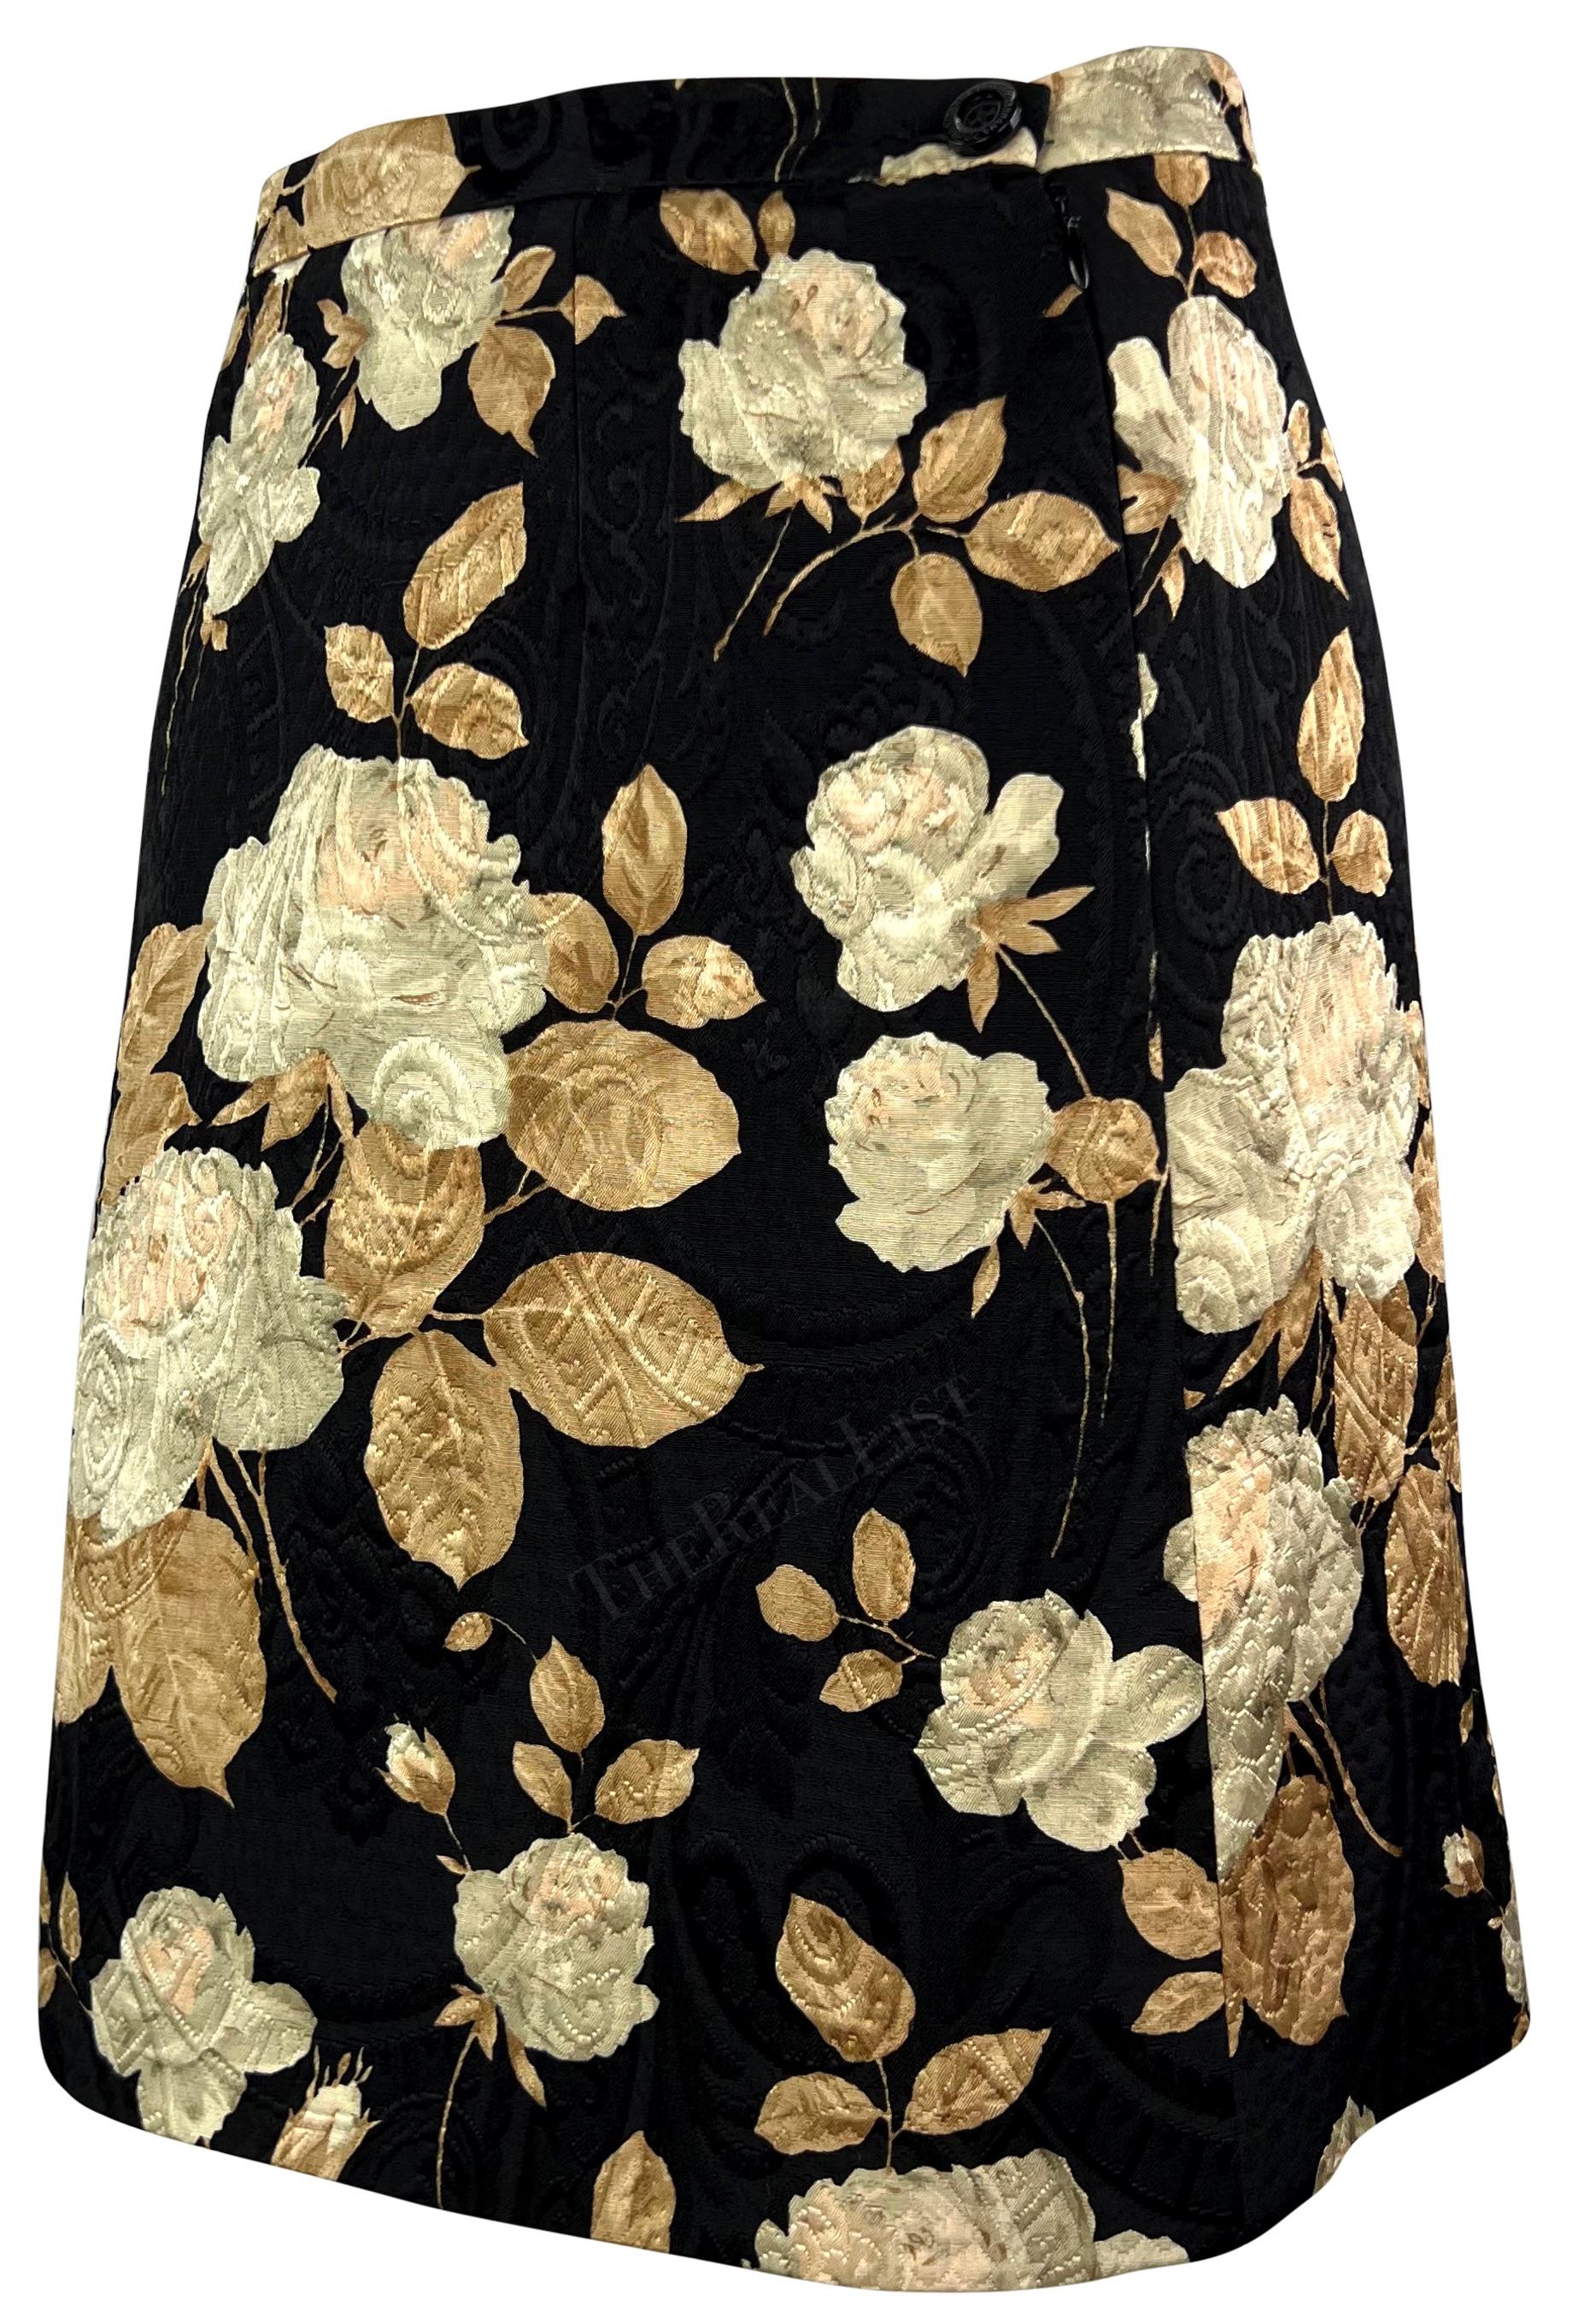 F/W 1996 Dolce & Gabbana Black Floral Jacquard Textured Pencil Skirt  In Excellent Condition For Sale In West Hollywood, CA